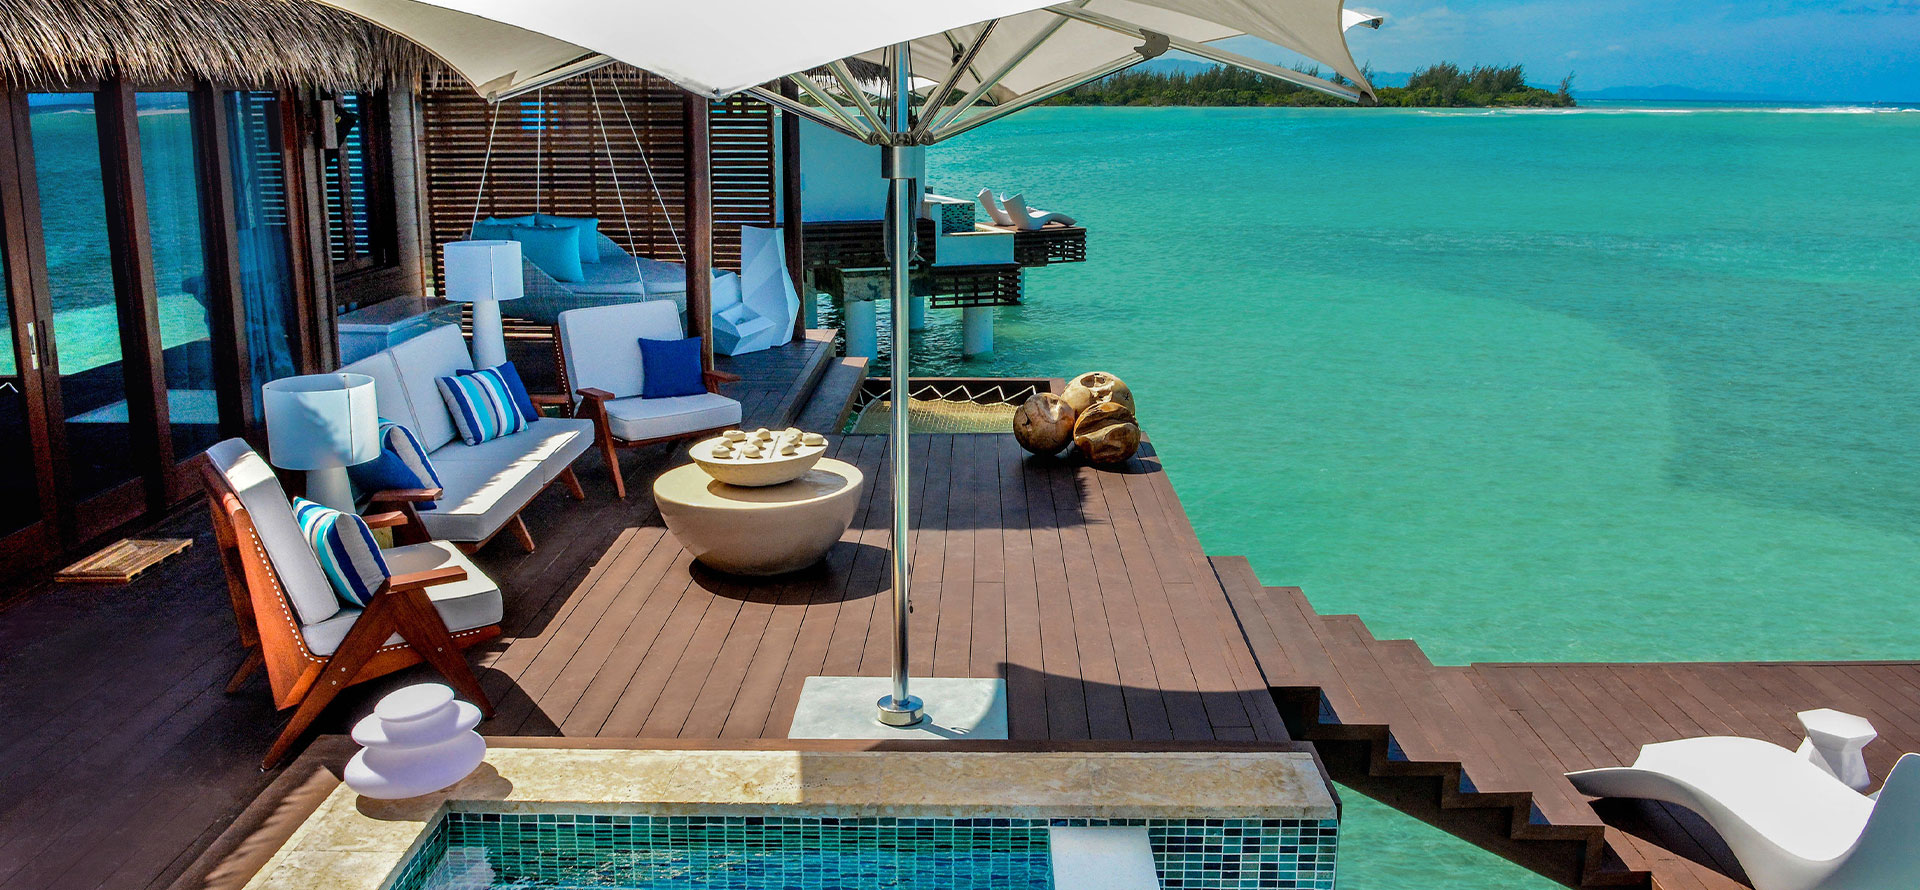 Bahamas overwater bungalow with pool.